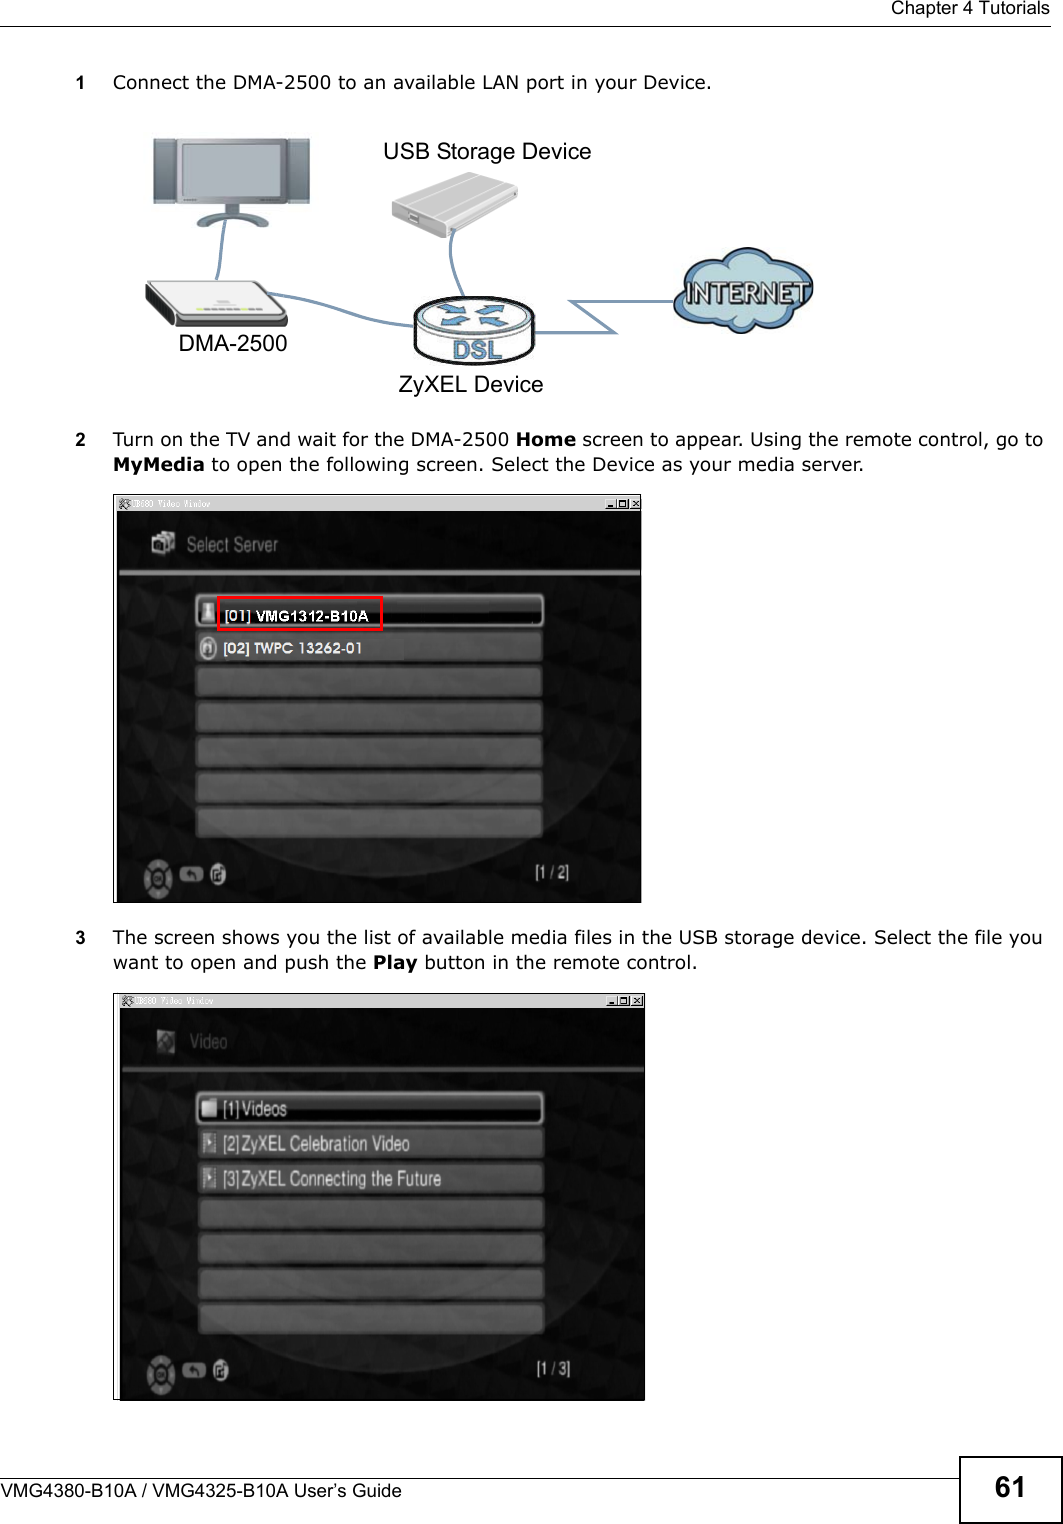  Chapter 4 TutorialsVMG4380-B10A / VMG4325-B10A User’s Guide 611Connect the DMA-2500 to an available LAN port in your Device.Tutorial: Media Server Setup (Using DMA)2Turn on the TV and wait for the DMA-2500 Home screen to appear. Using the remote control, go to MyMedia to open the following screen. Select the Device as your media server.Tutorial: Media Sharing using DMA-25003The screen shows you the list of available media files in the USB storage device. Select the file you want to open and push the Play button in the remote control.Tutorial: Media Sharing using DMA-2500 (2)DMA-2500ZyXEL DeviceUSB Storage Device